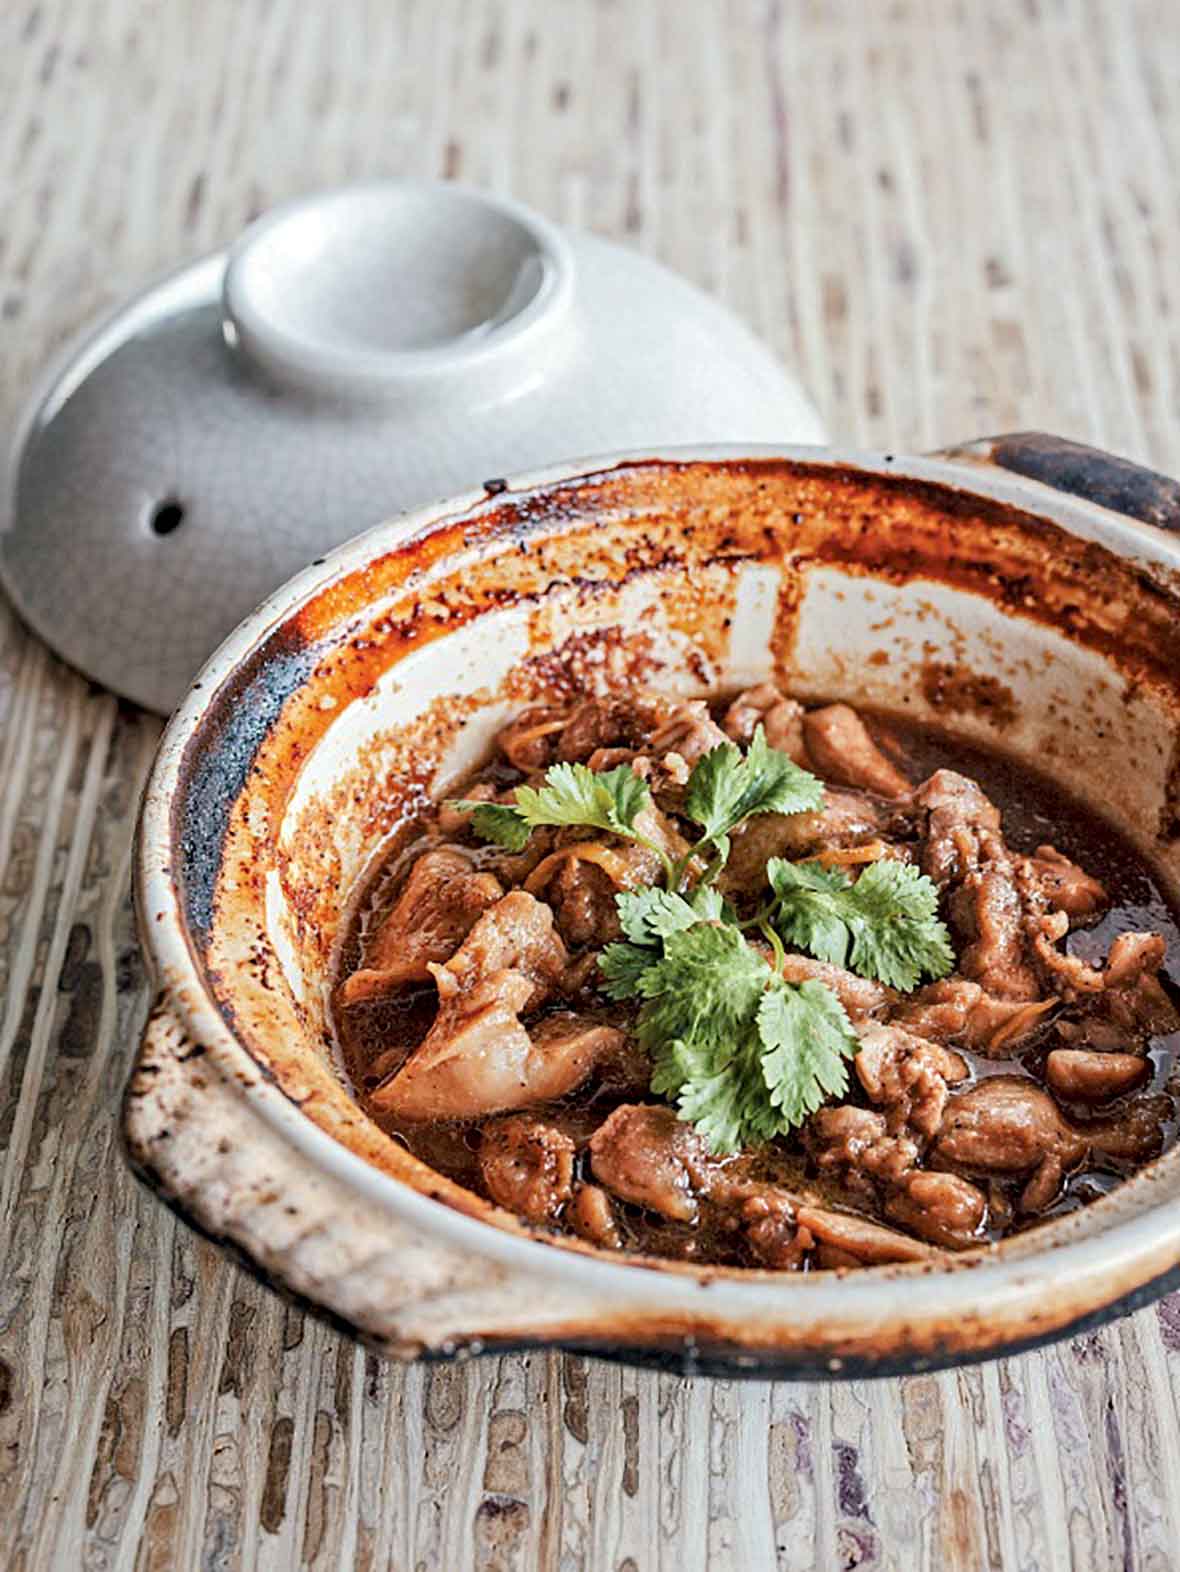 Clay pot filled with Vietnamese caramel chicken pieces and cilantro on a wooden table.